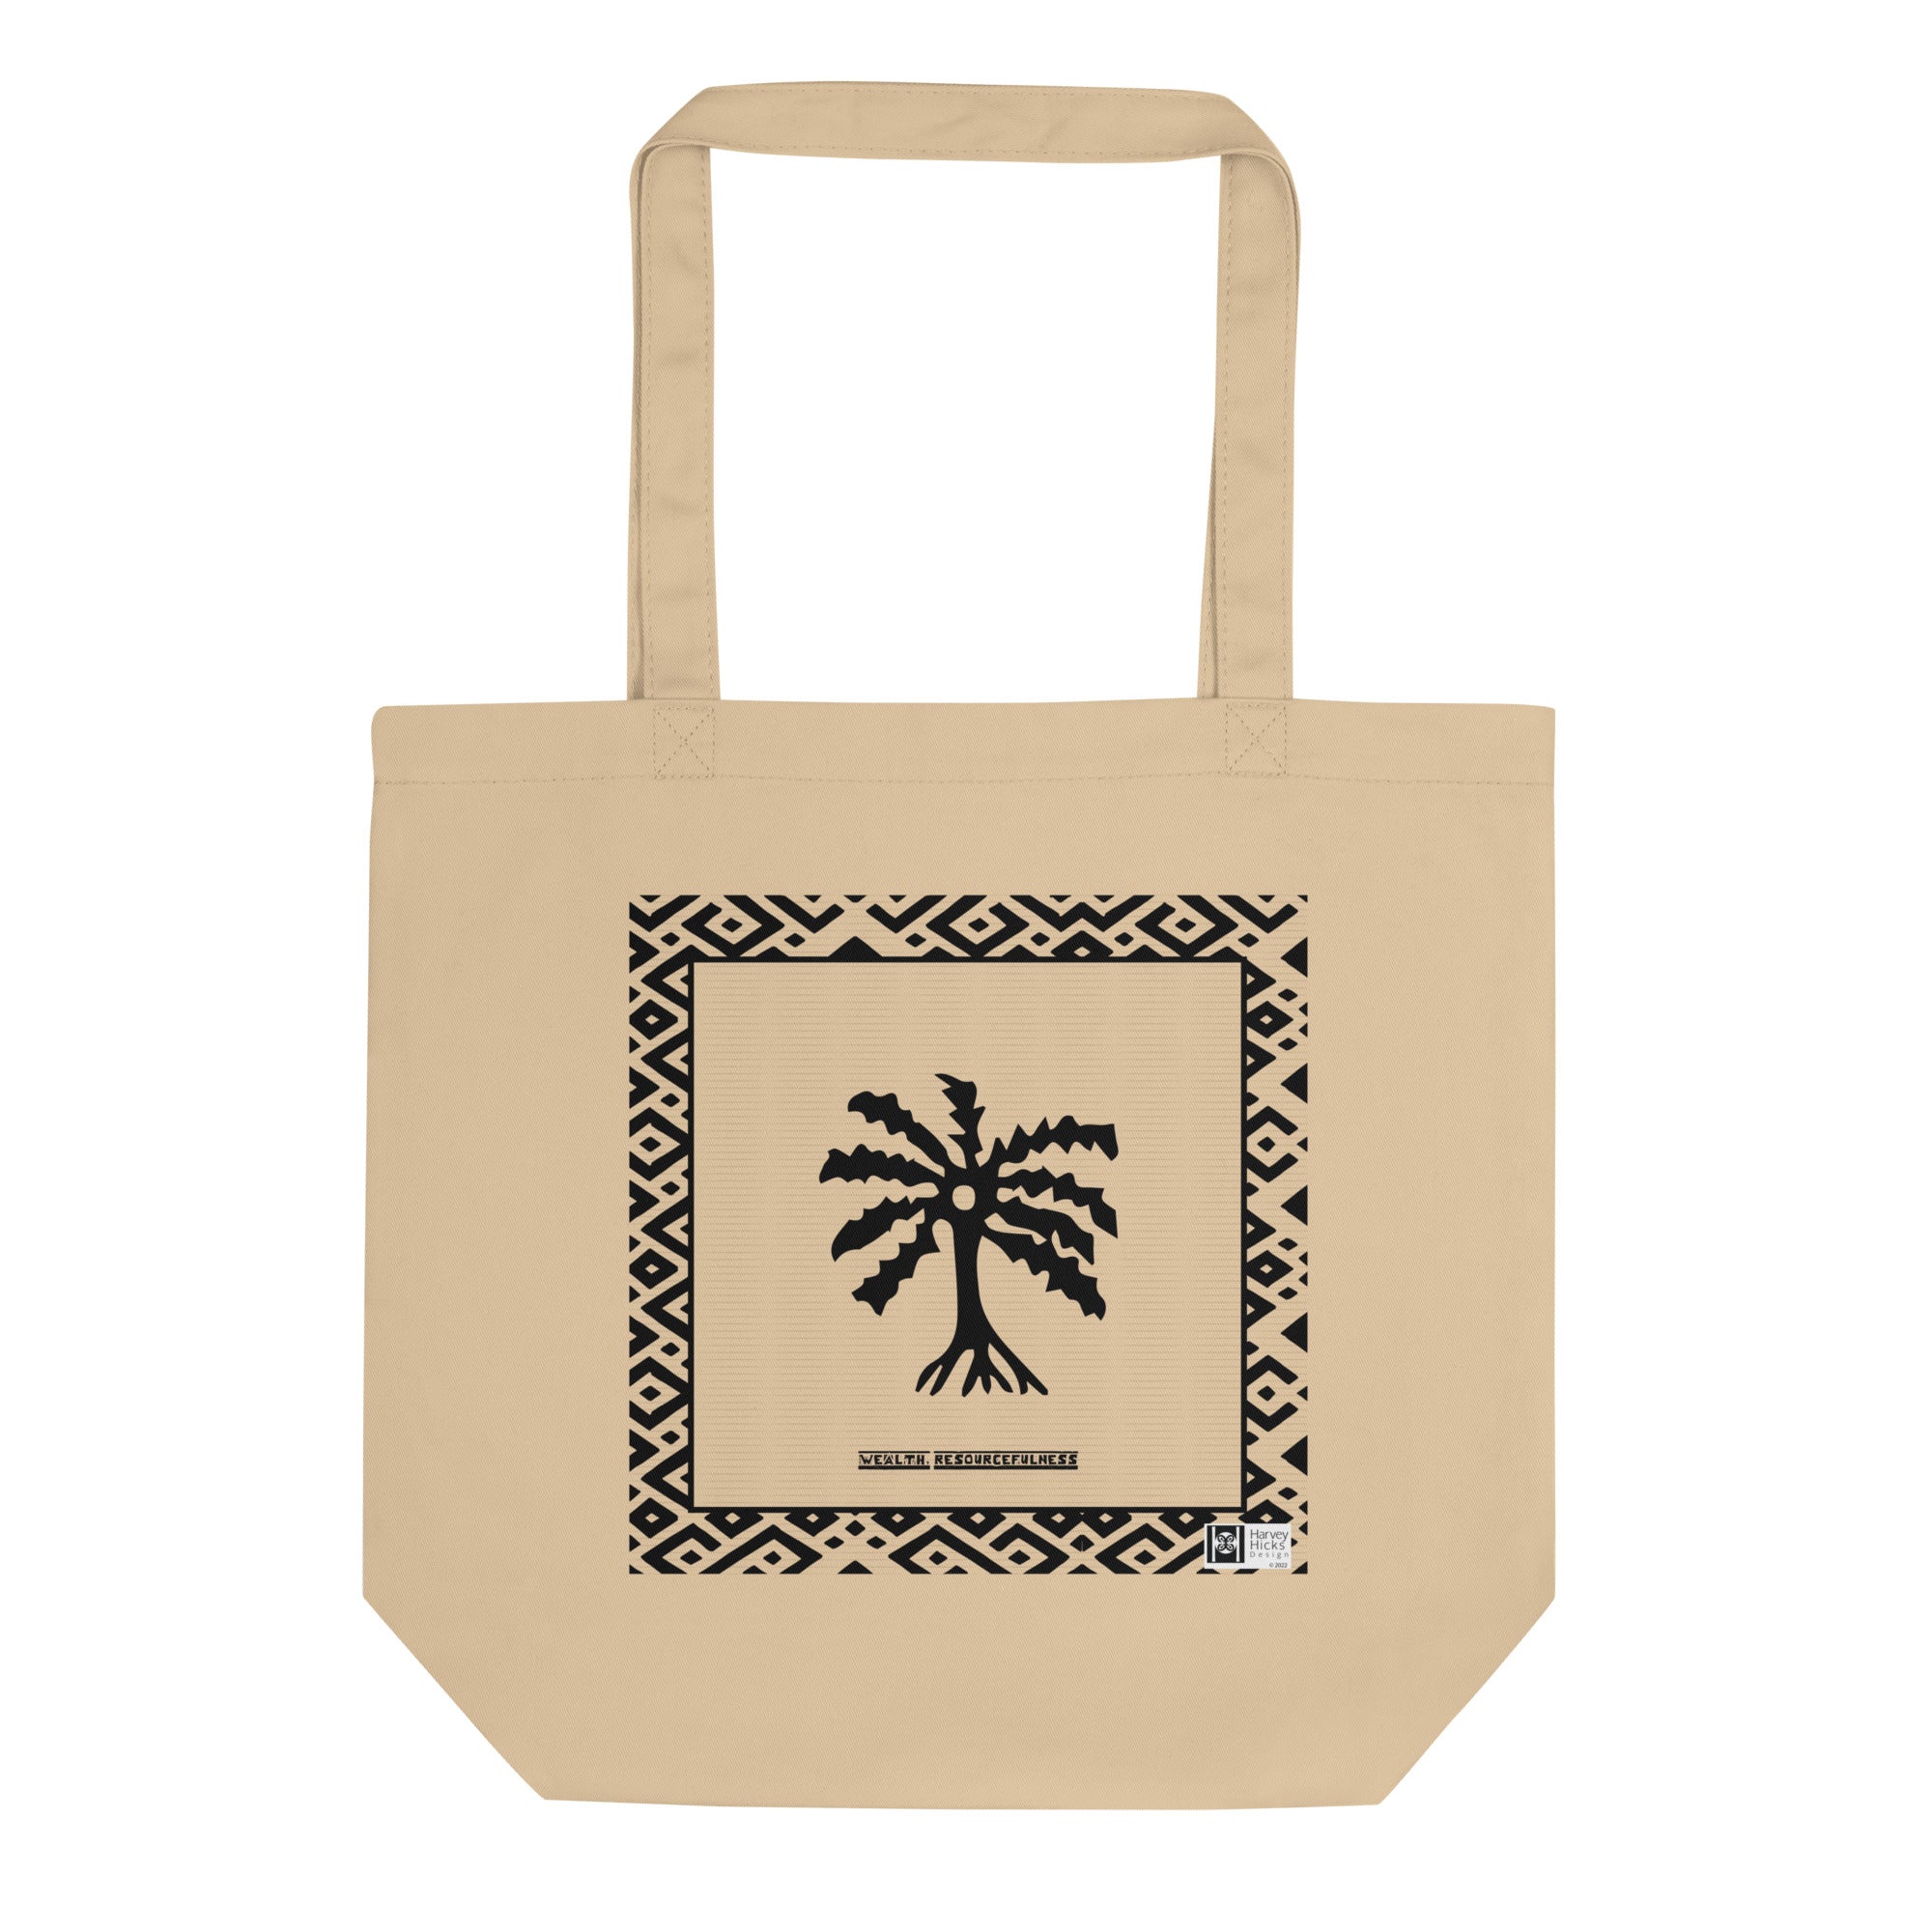 100% cotton Eco Tote Bag, featuring the Adinkra symbol for resourcefulness